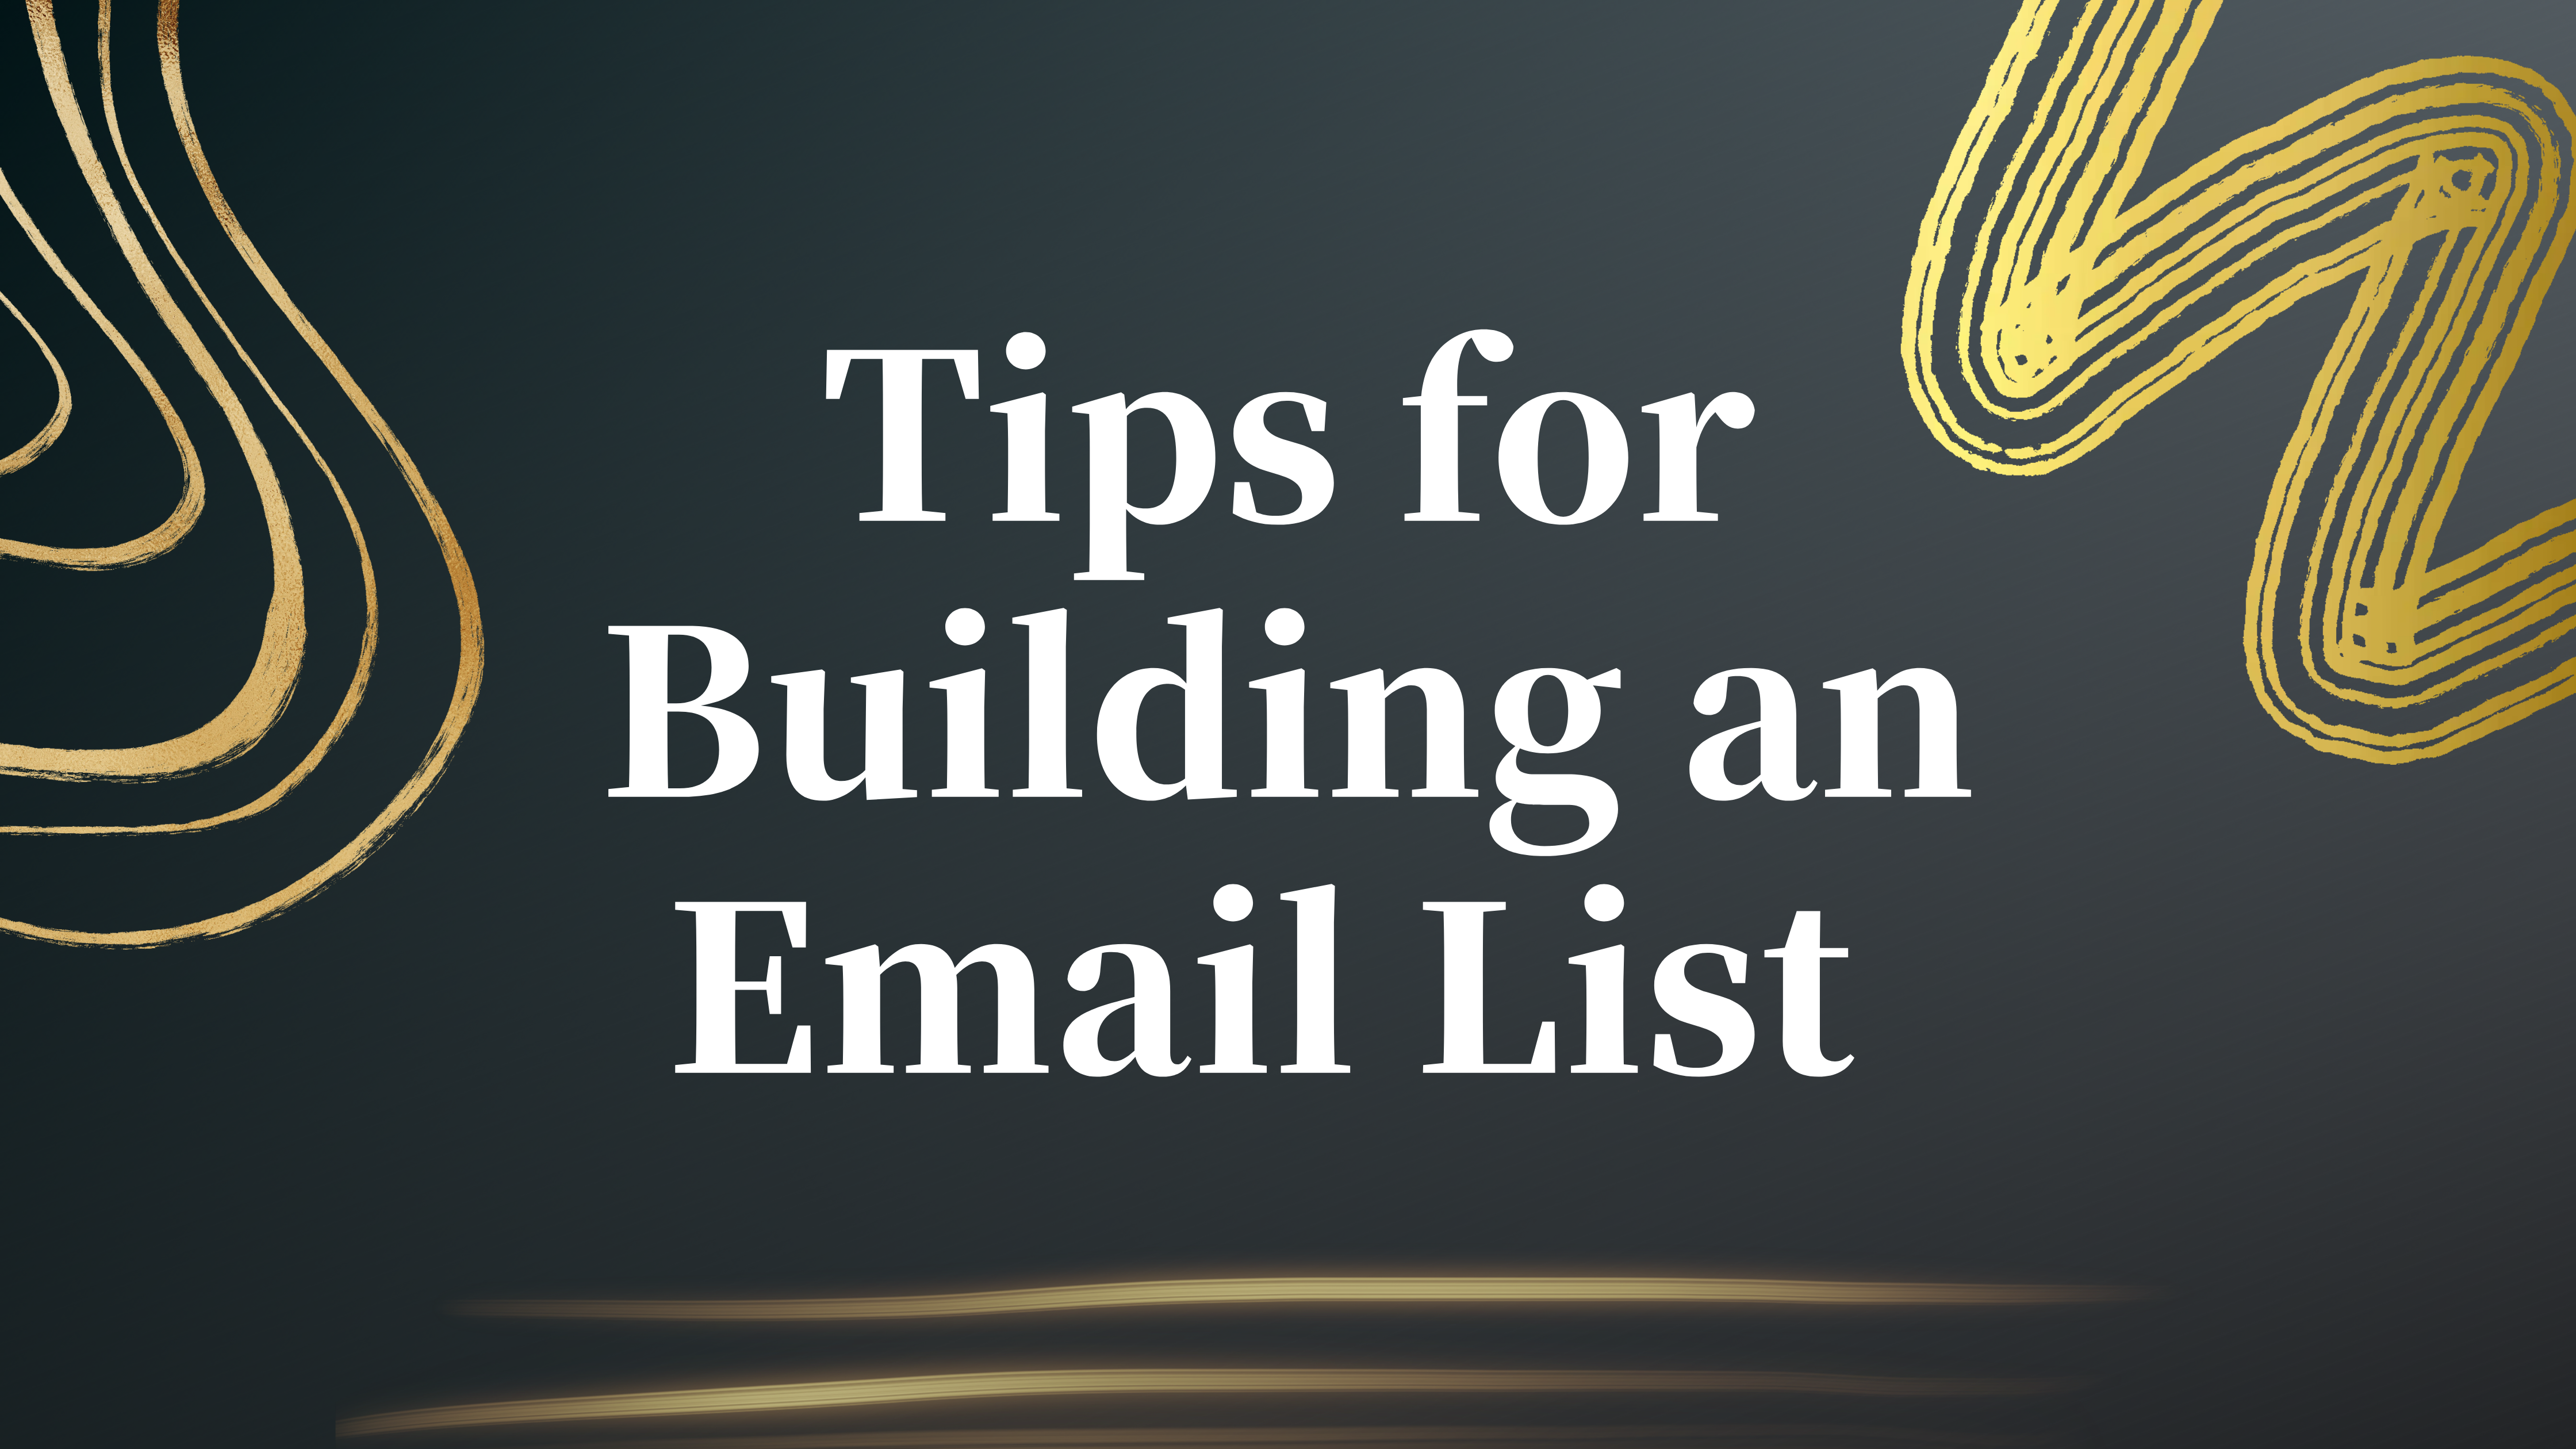 5 Timeless Tips for Building an Email List